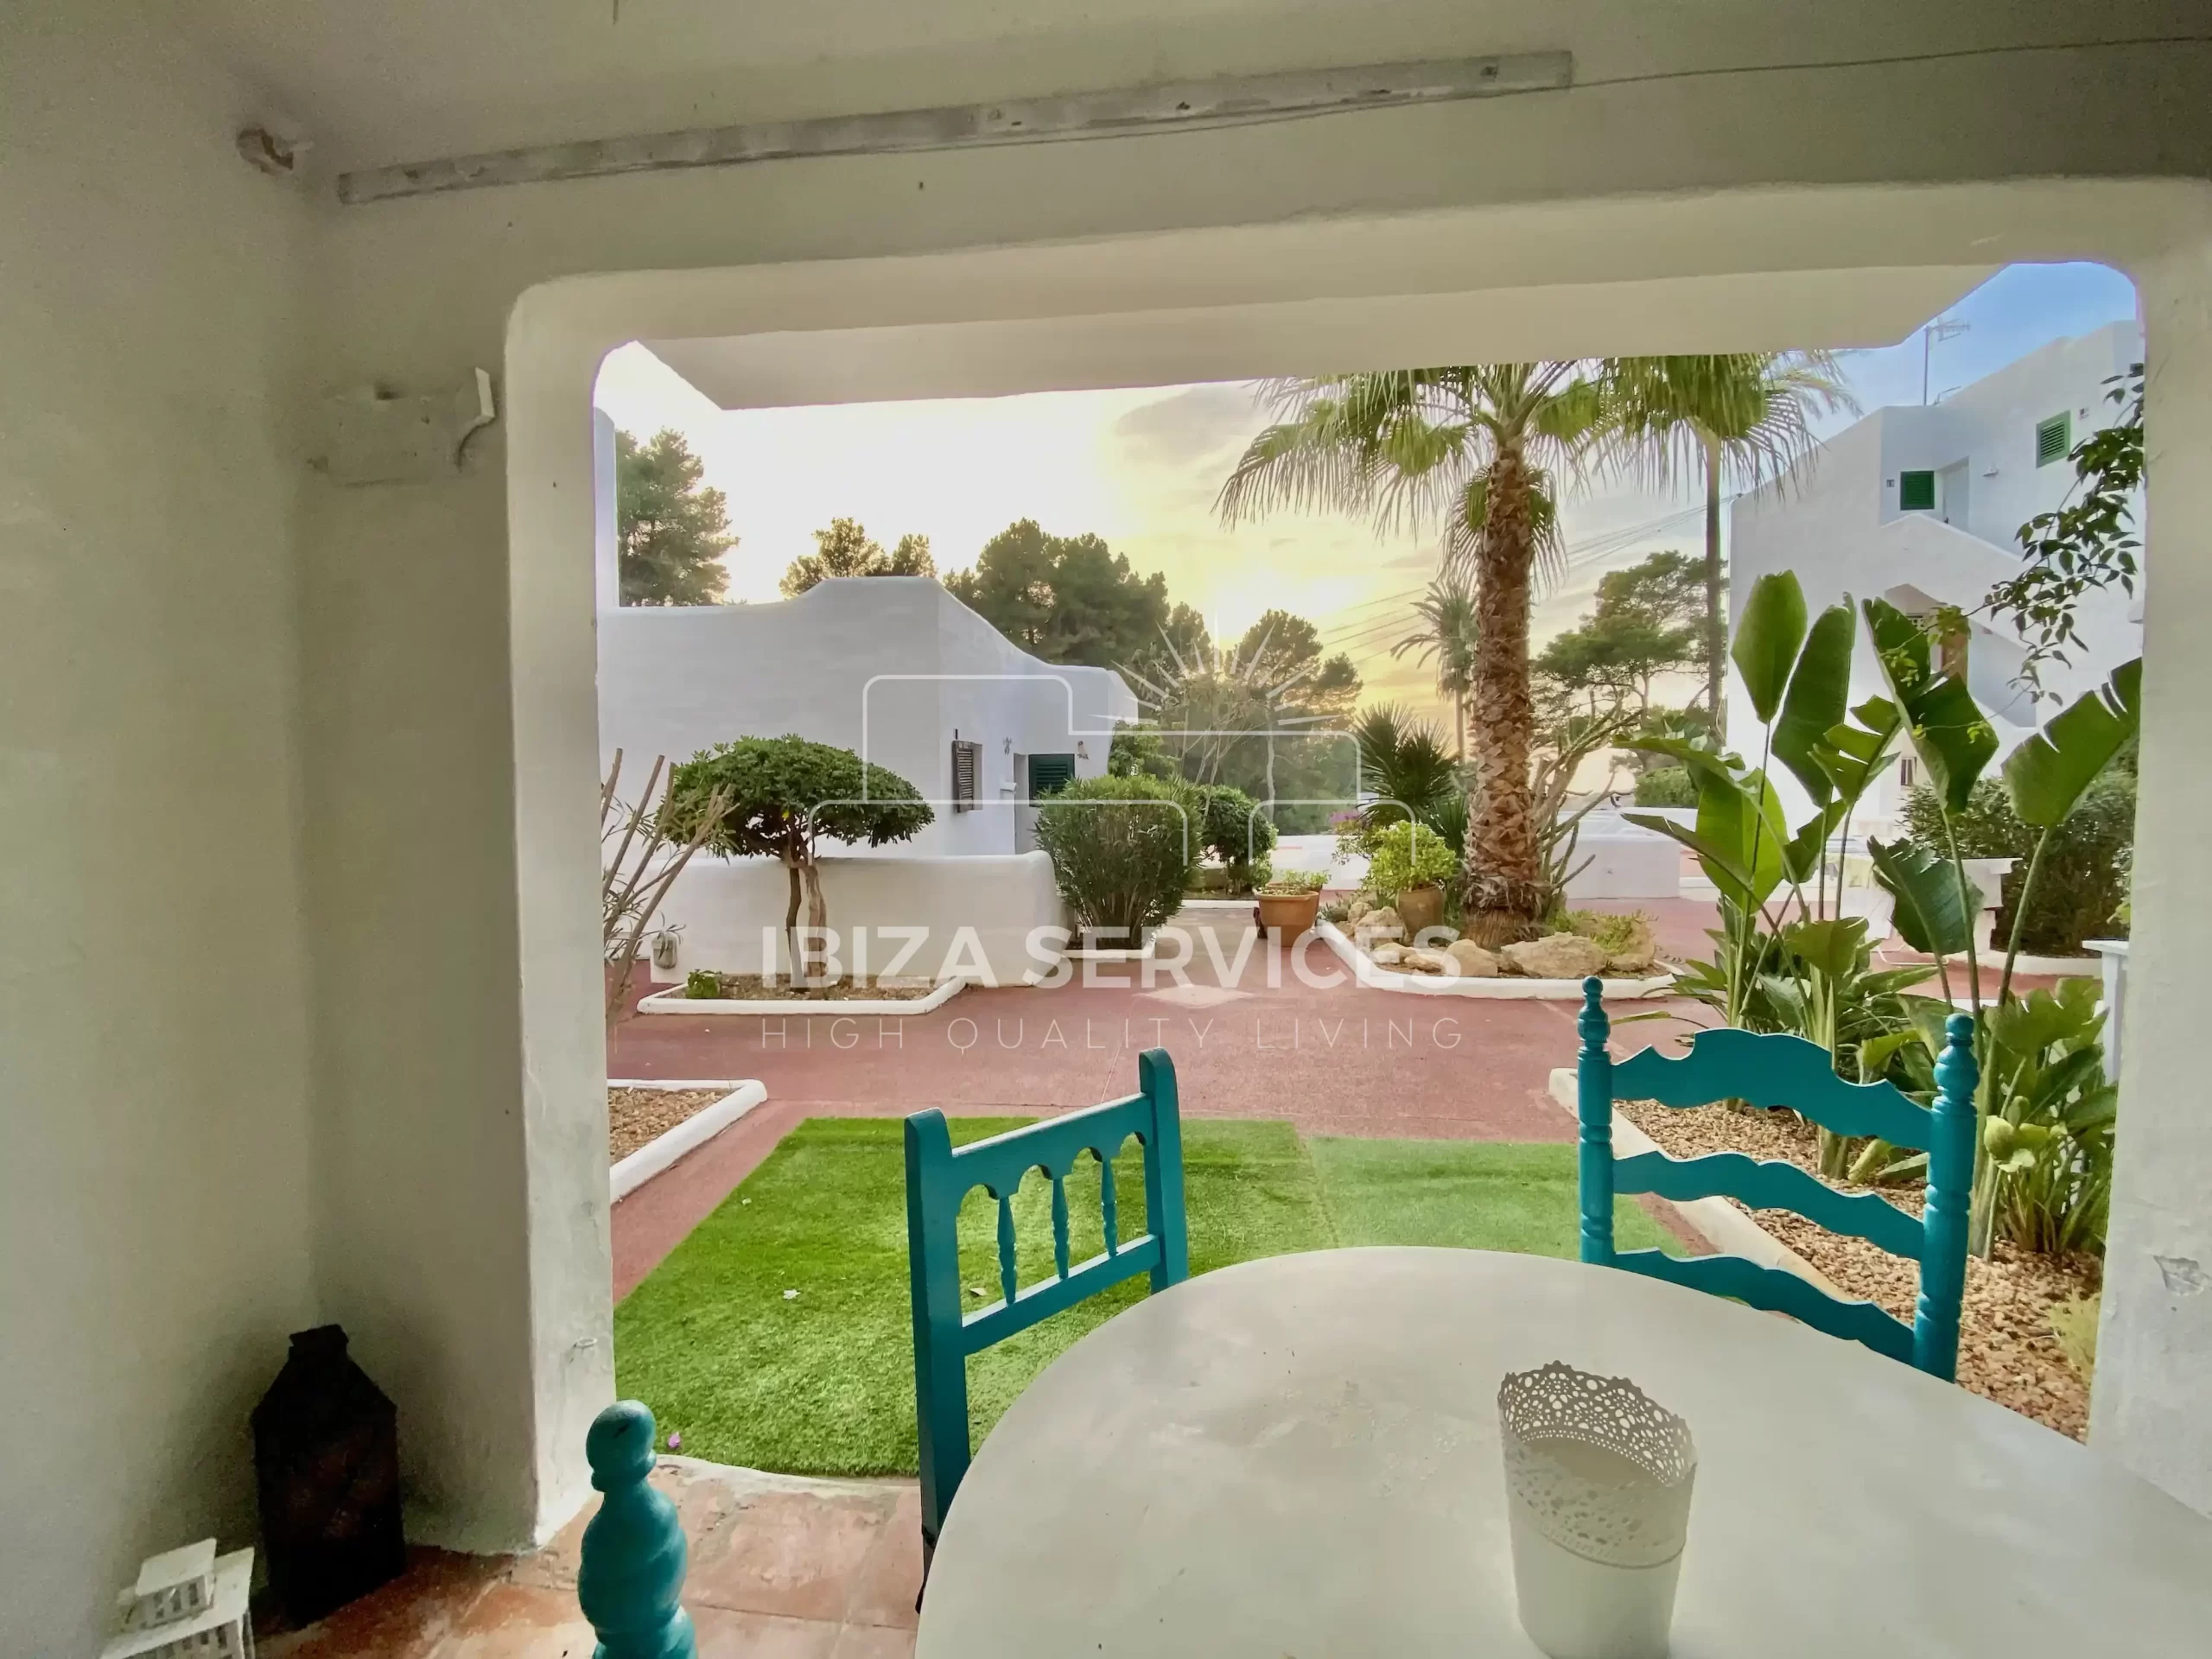 Cozy Seaside Apartment for Sale: Your Ideal Coastal Getaway